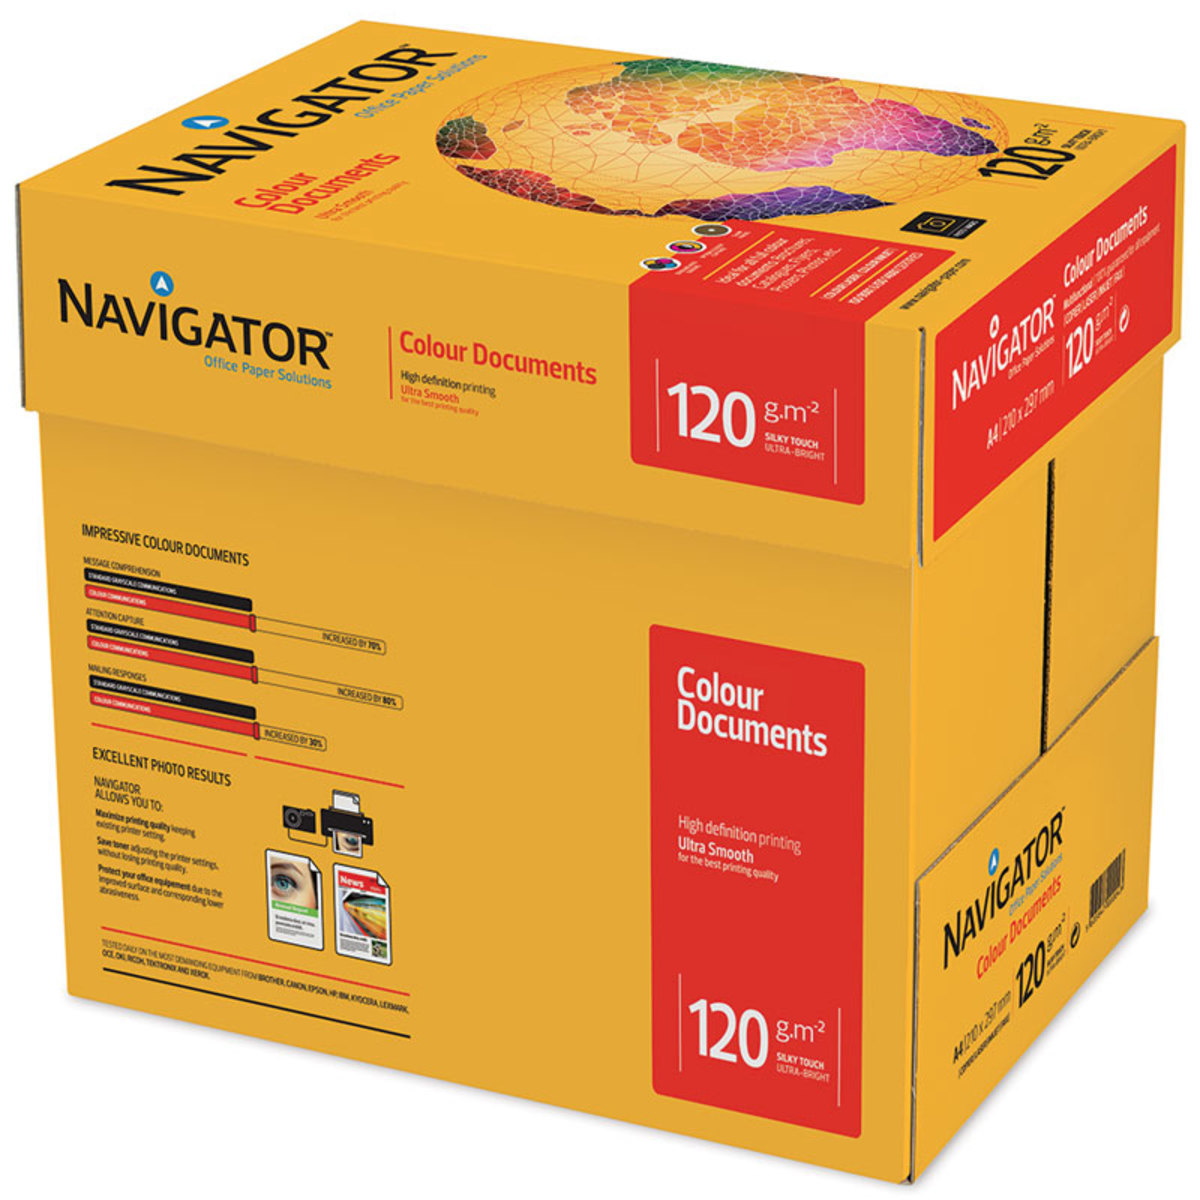 Navigator Colour Documents A4 120gsm White Box of Paper - 1250 sheets